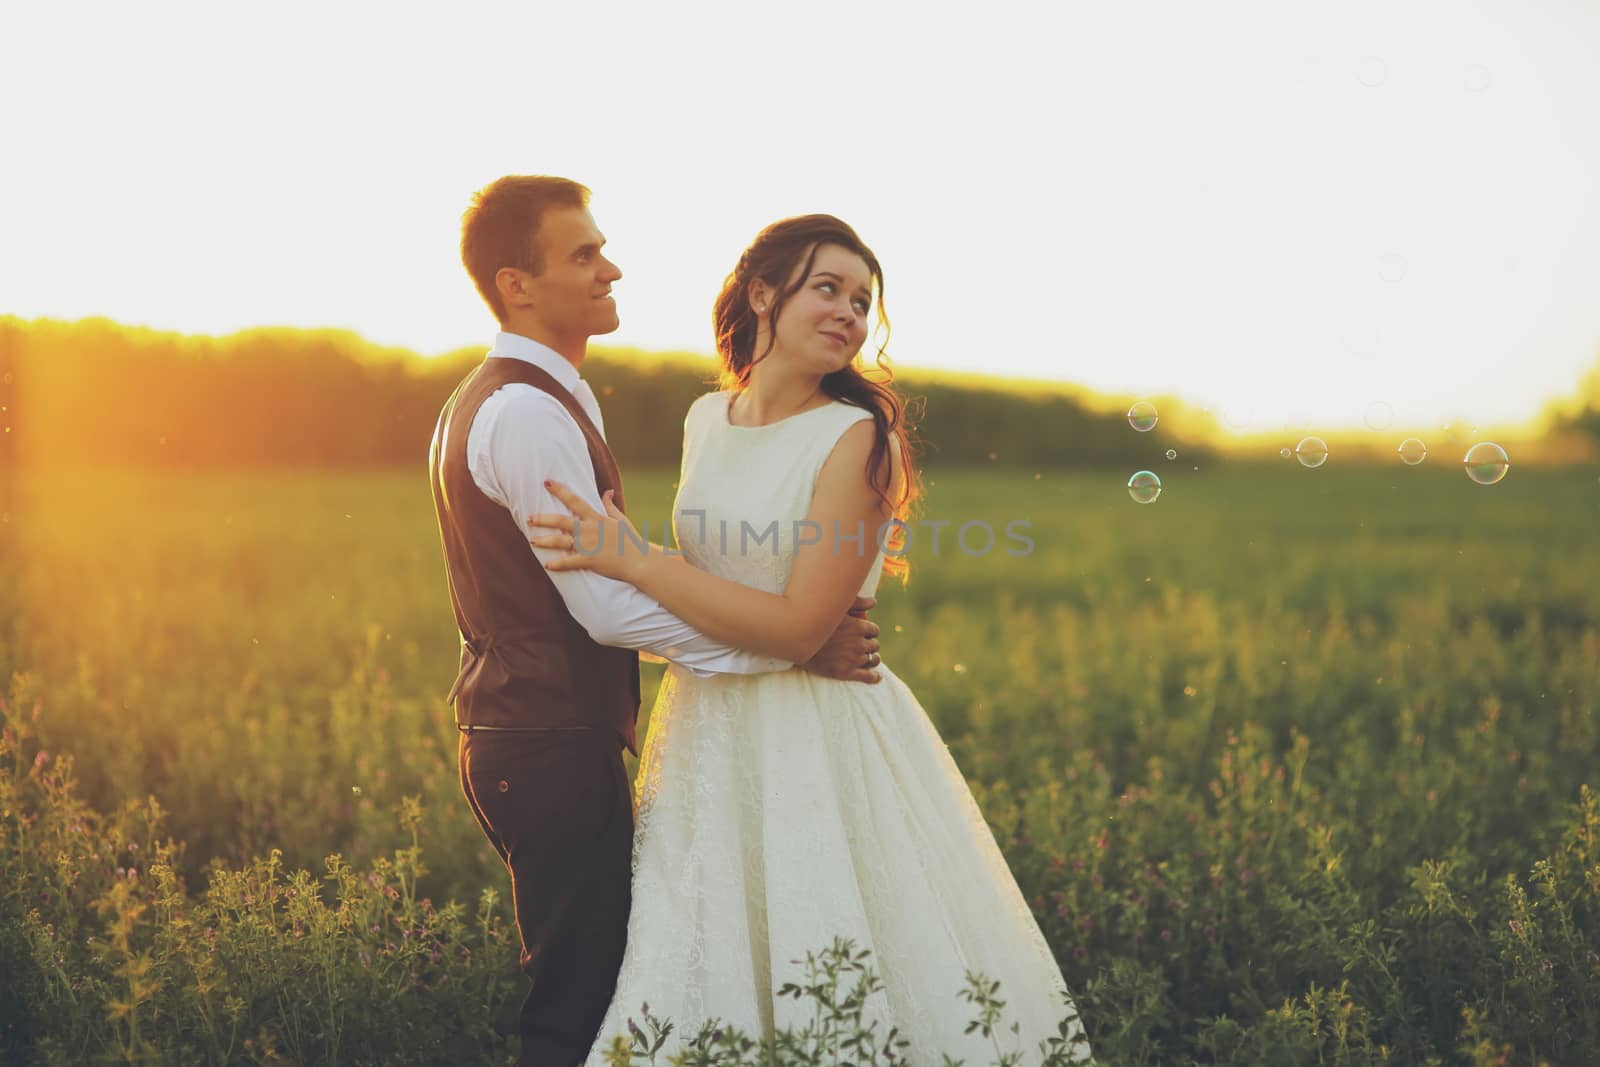 Happy bride and groom hug each other in the park at sunset. Wedding. Happy love concept. High quality photo